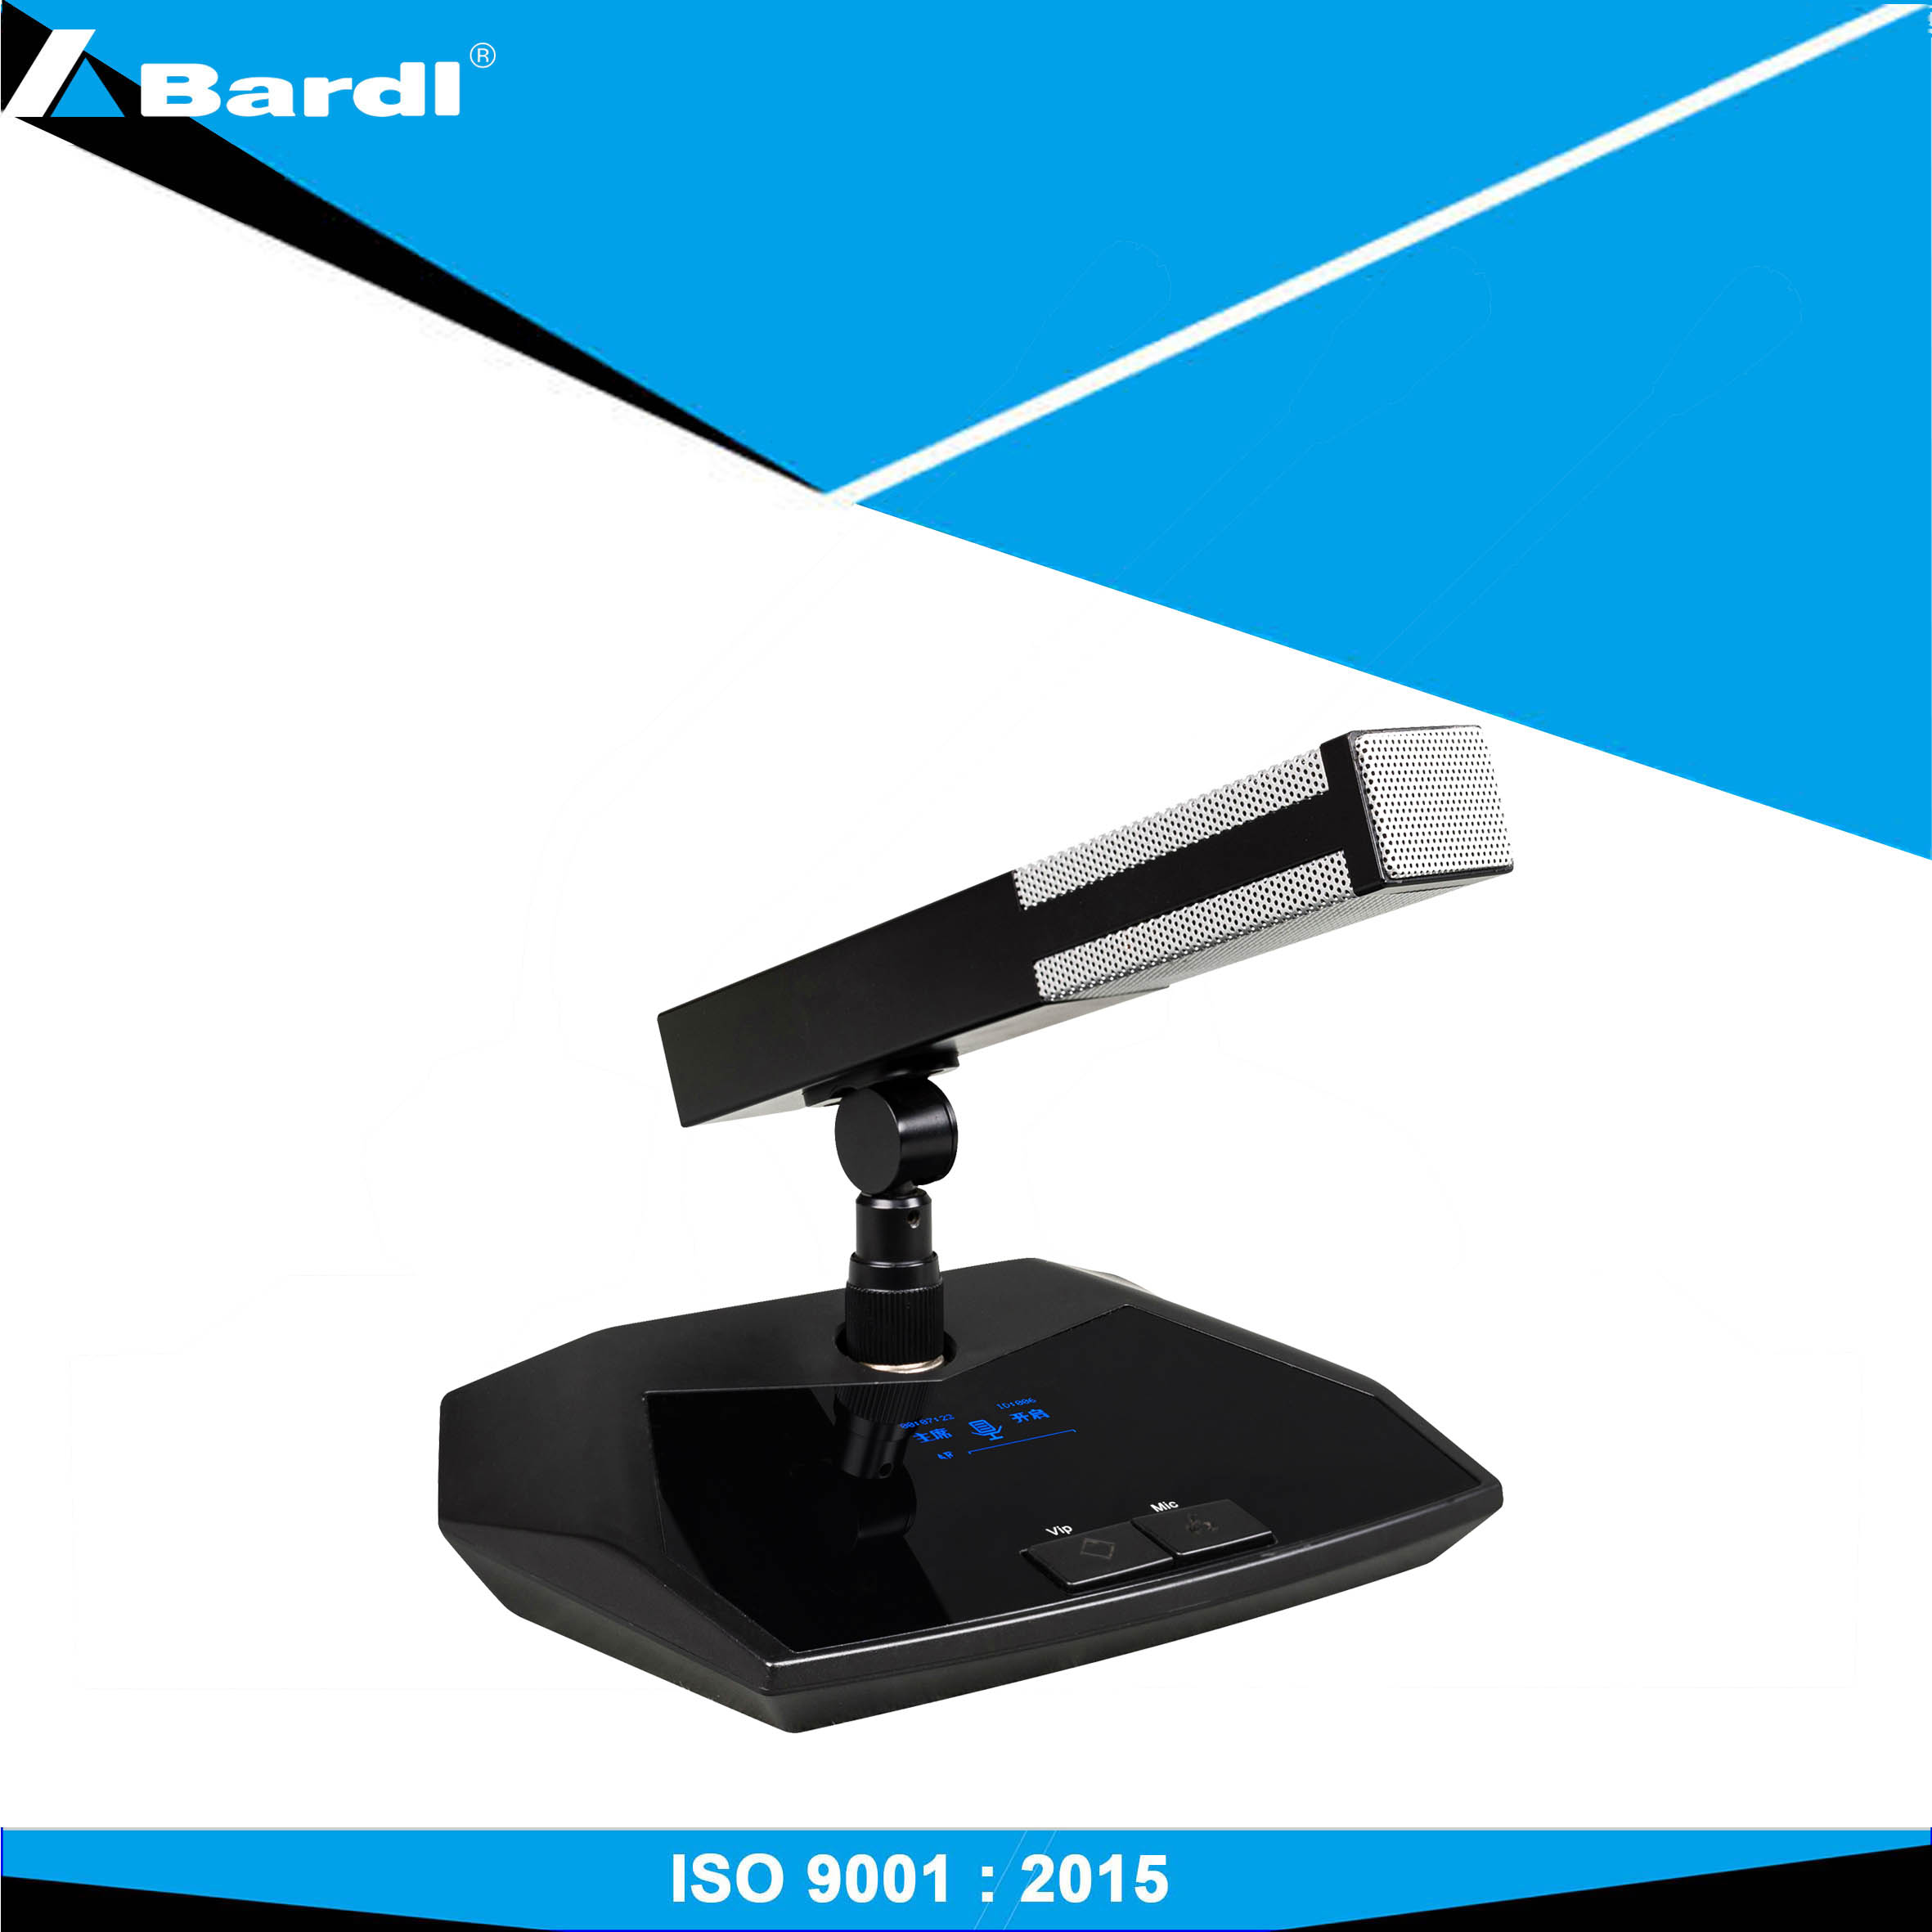 Bardl Conference System SC-3310